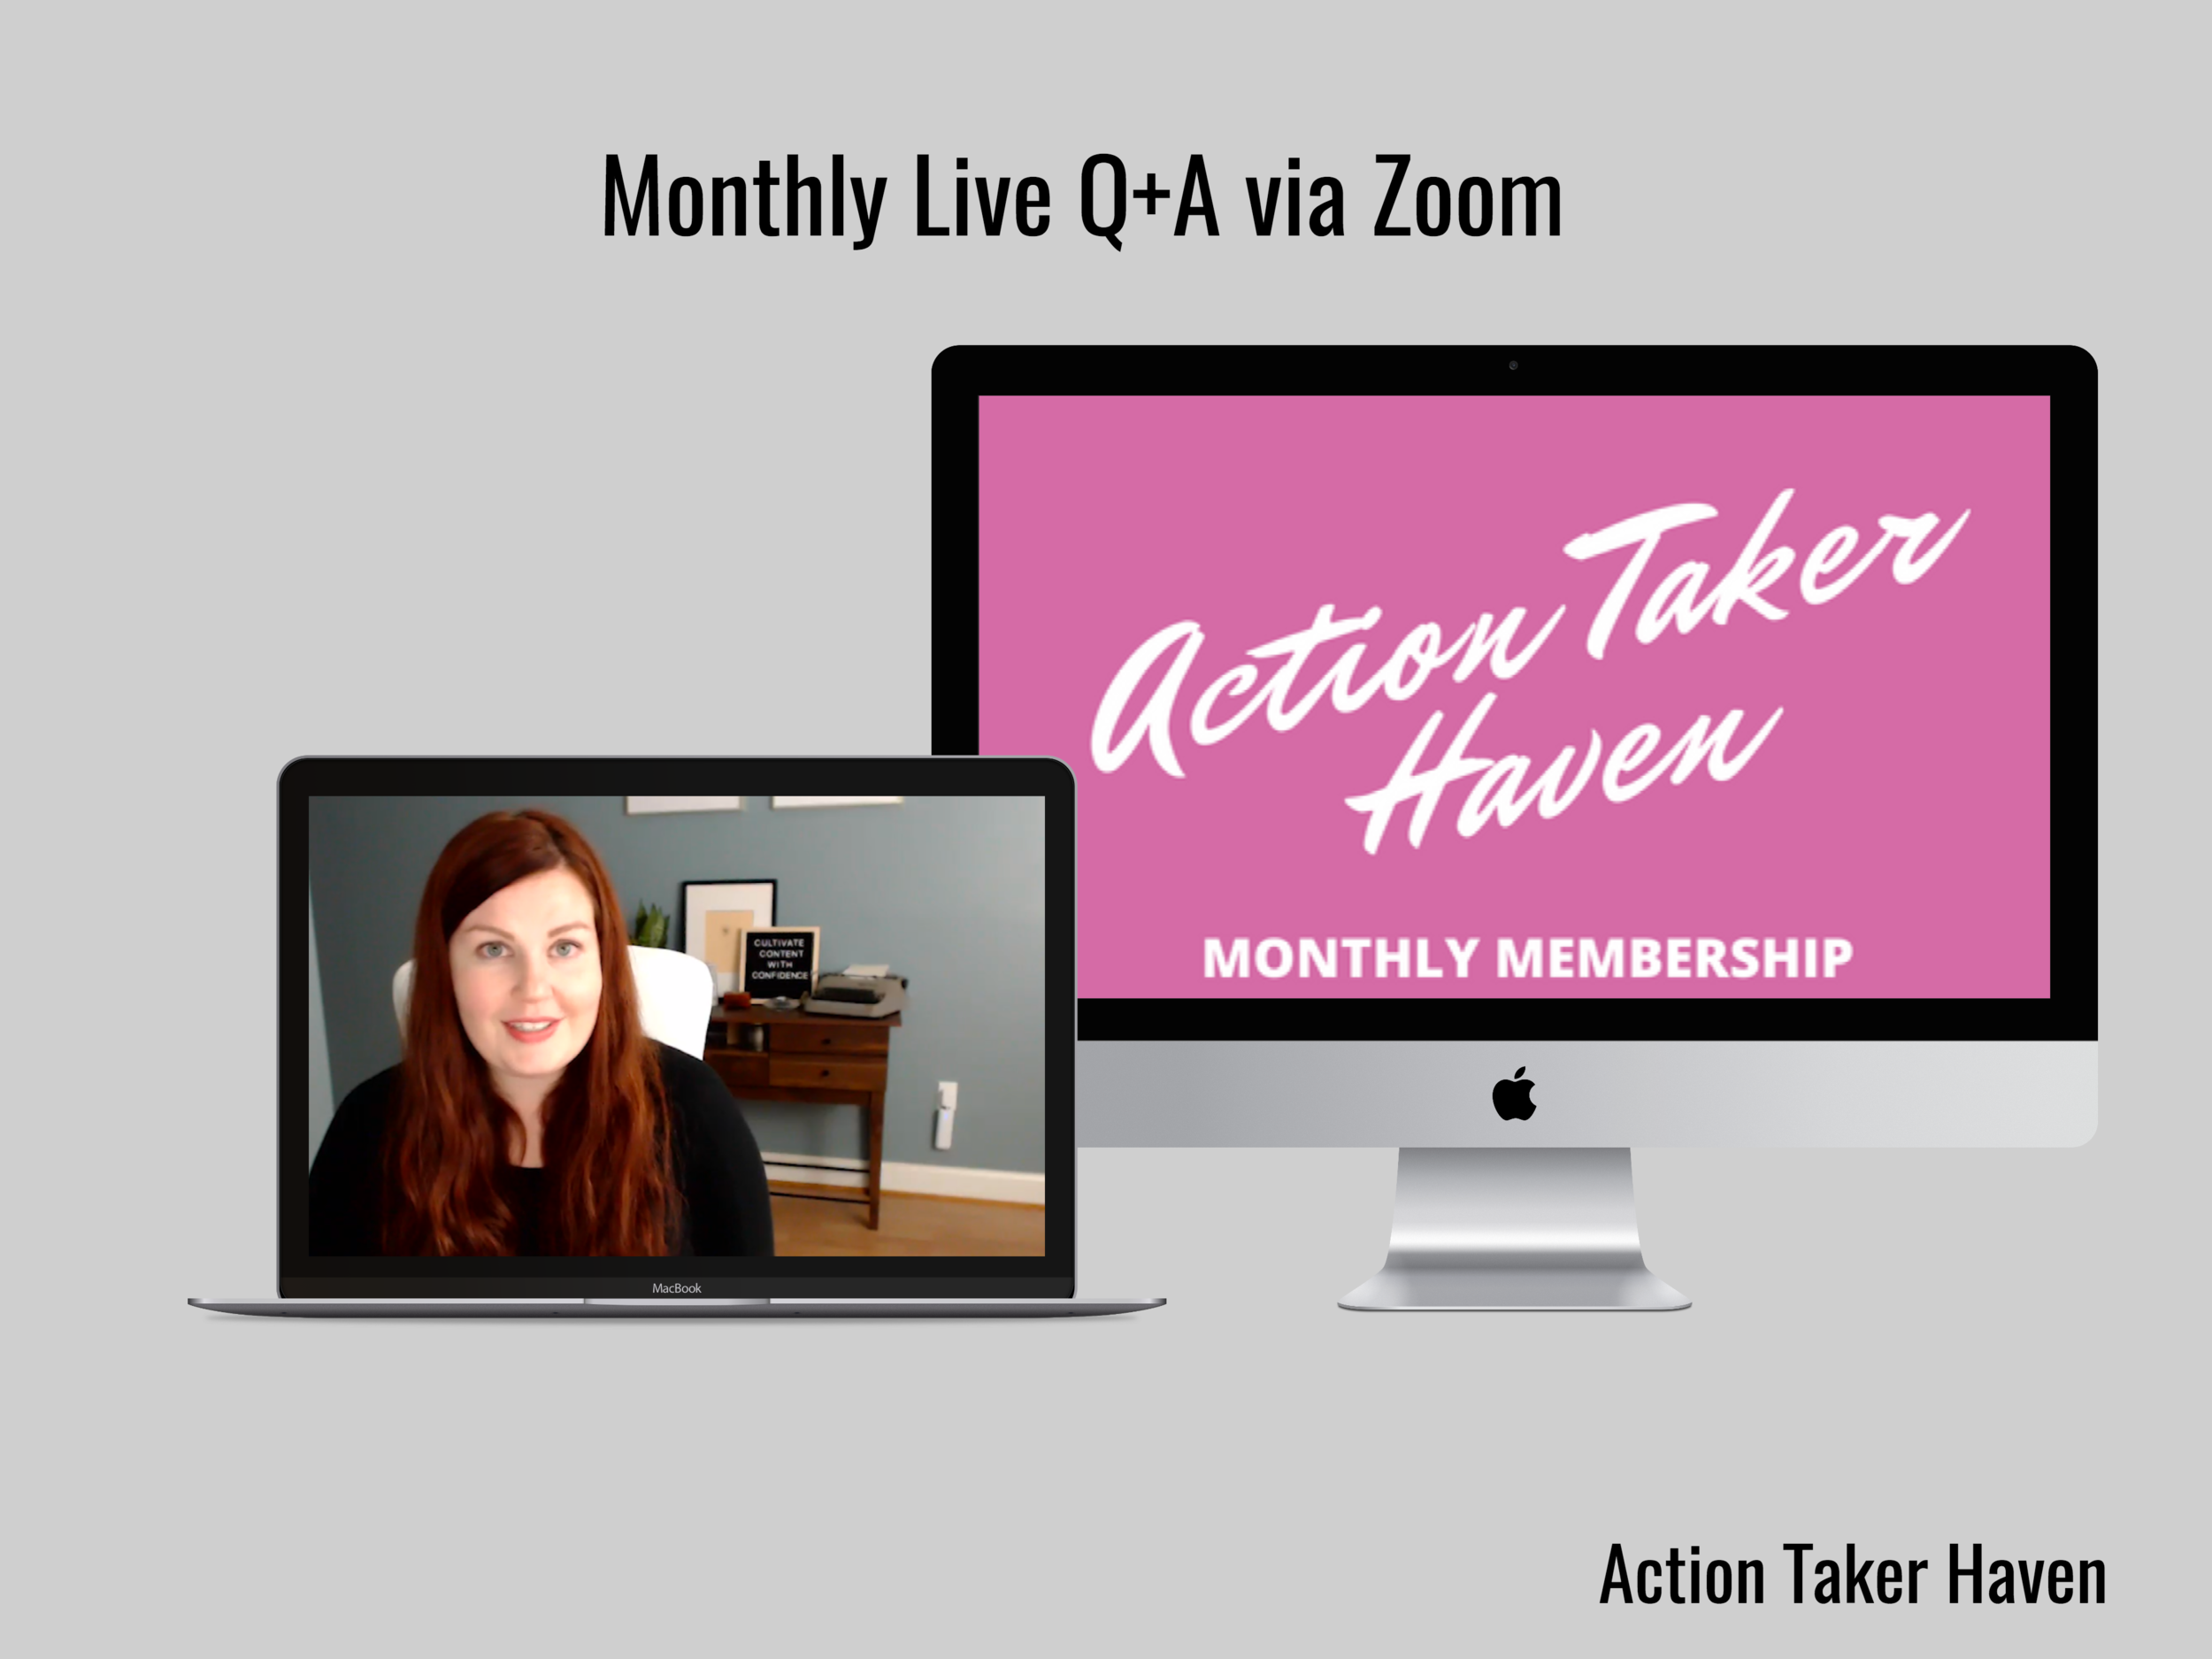 Join us in the Action Taker Haven a monthly membership for business owners! #onlinebusiness #actiontakerhaven #blogging